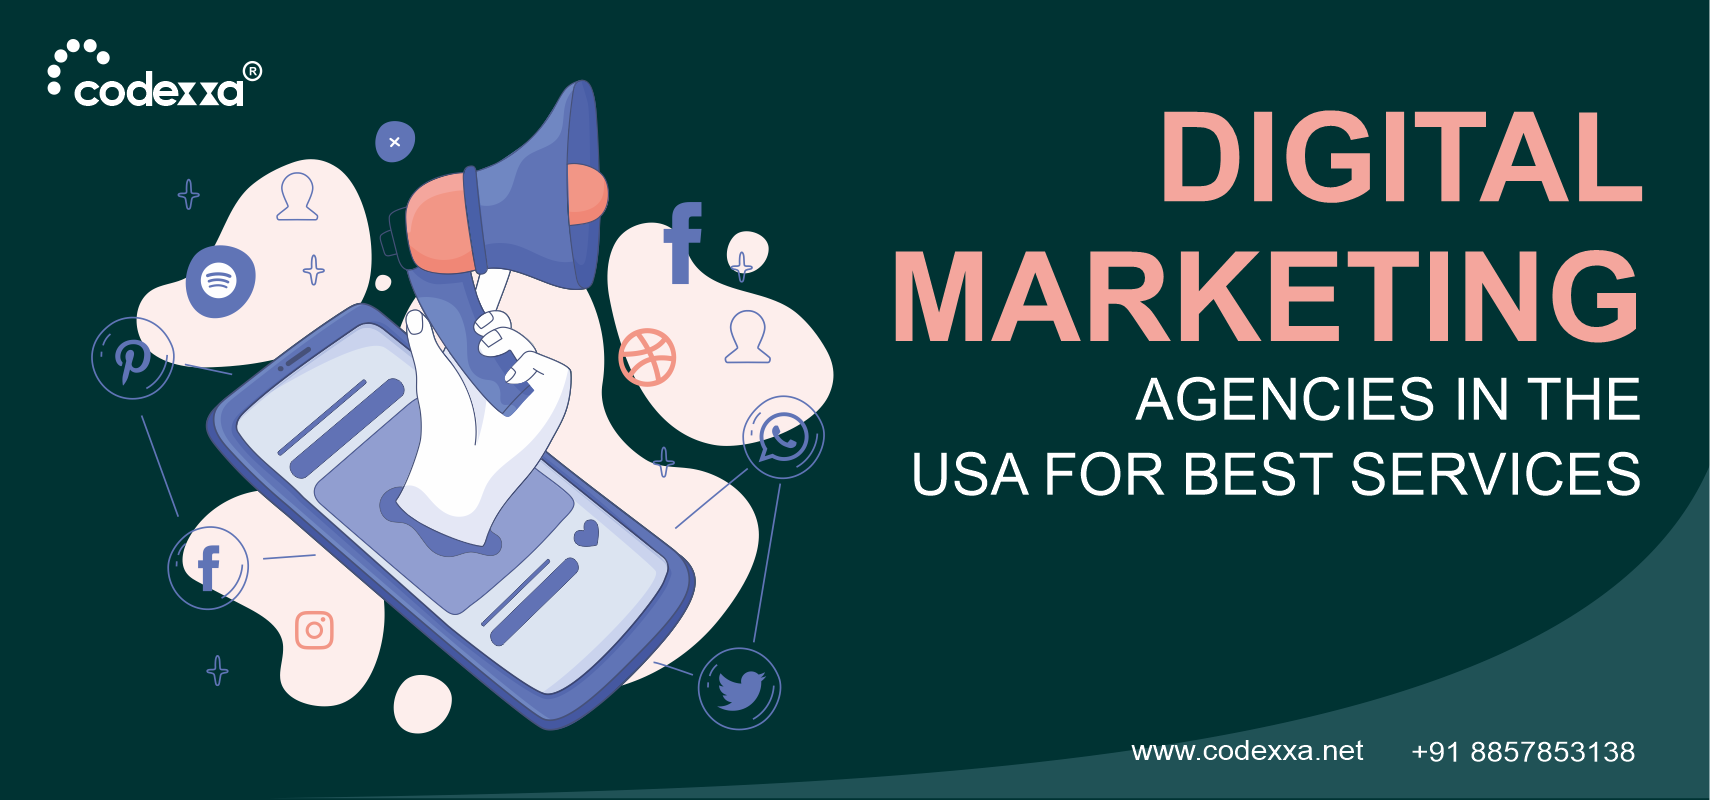 Digital-Marketing-Agencies-in-the-USA-for-best-services